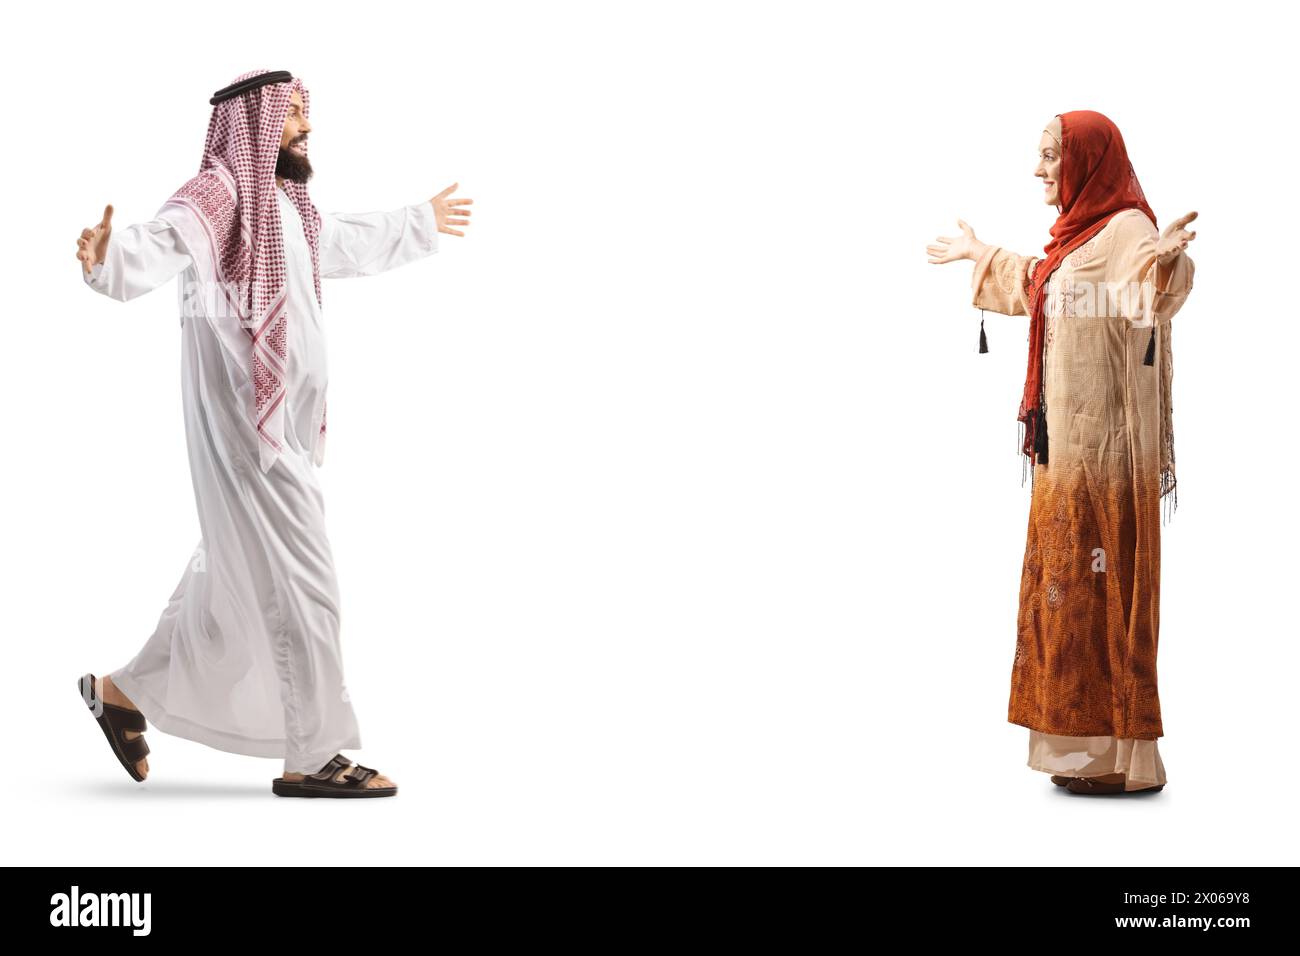 Full length profile shot of a saudi arab man meeting a woman wearing hijab isolated on white background Stock Photo